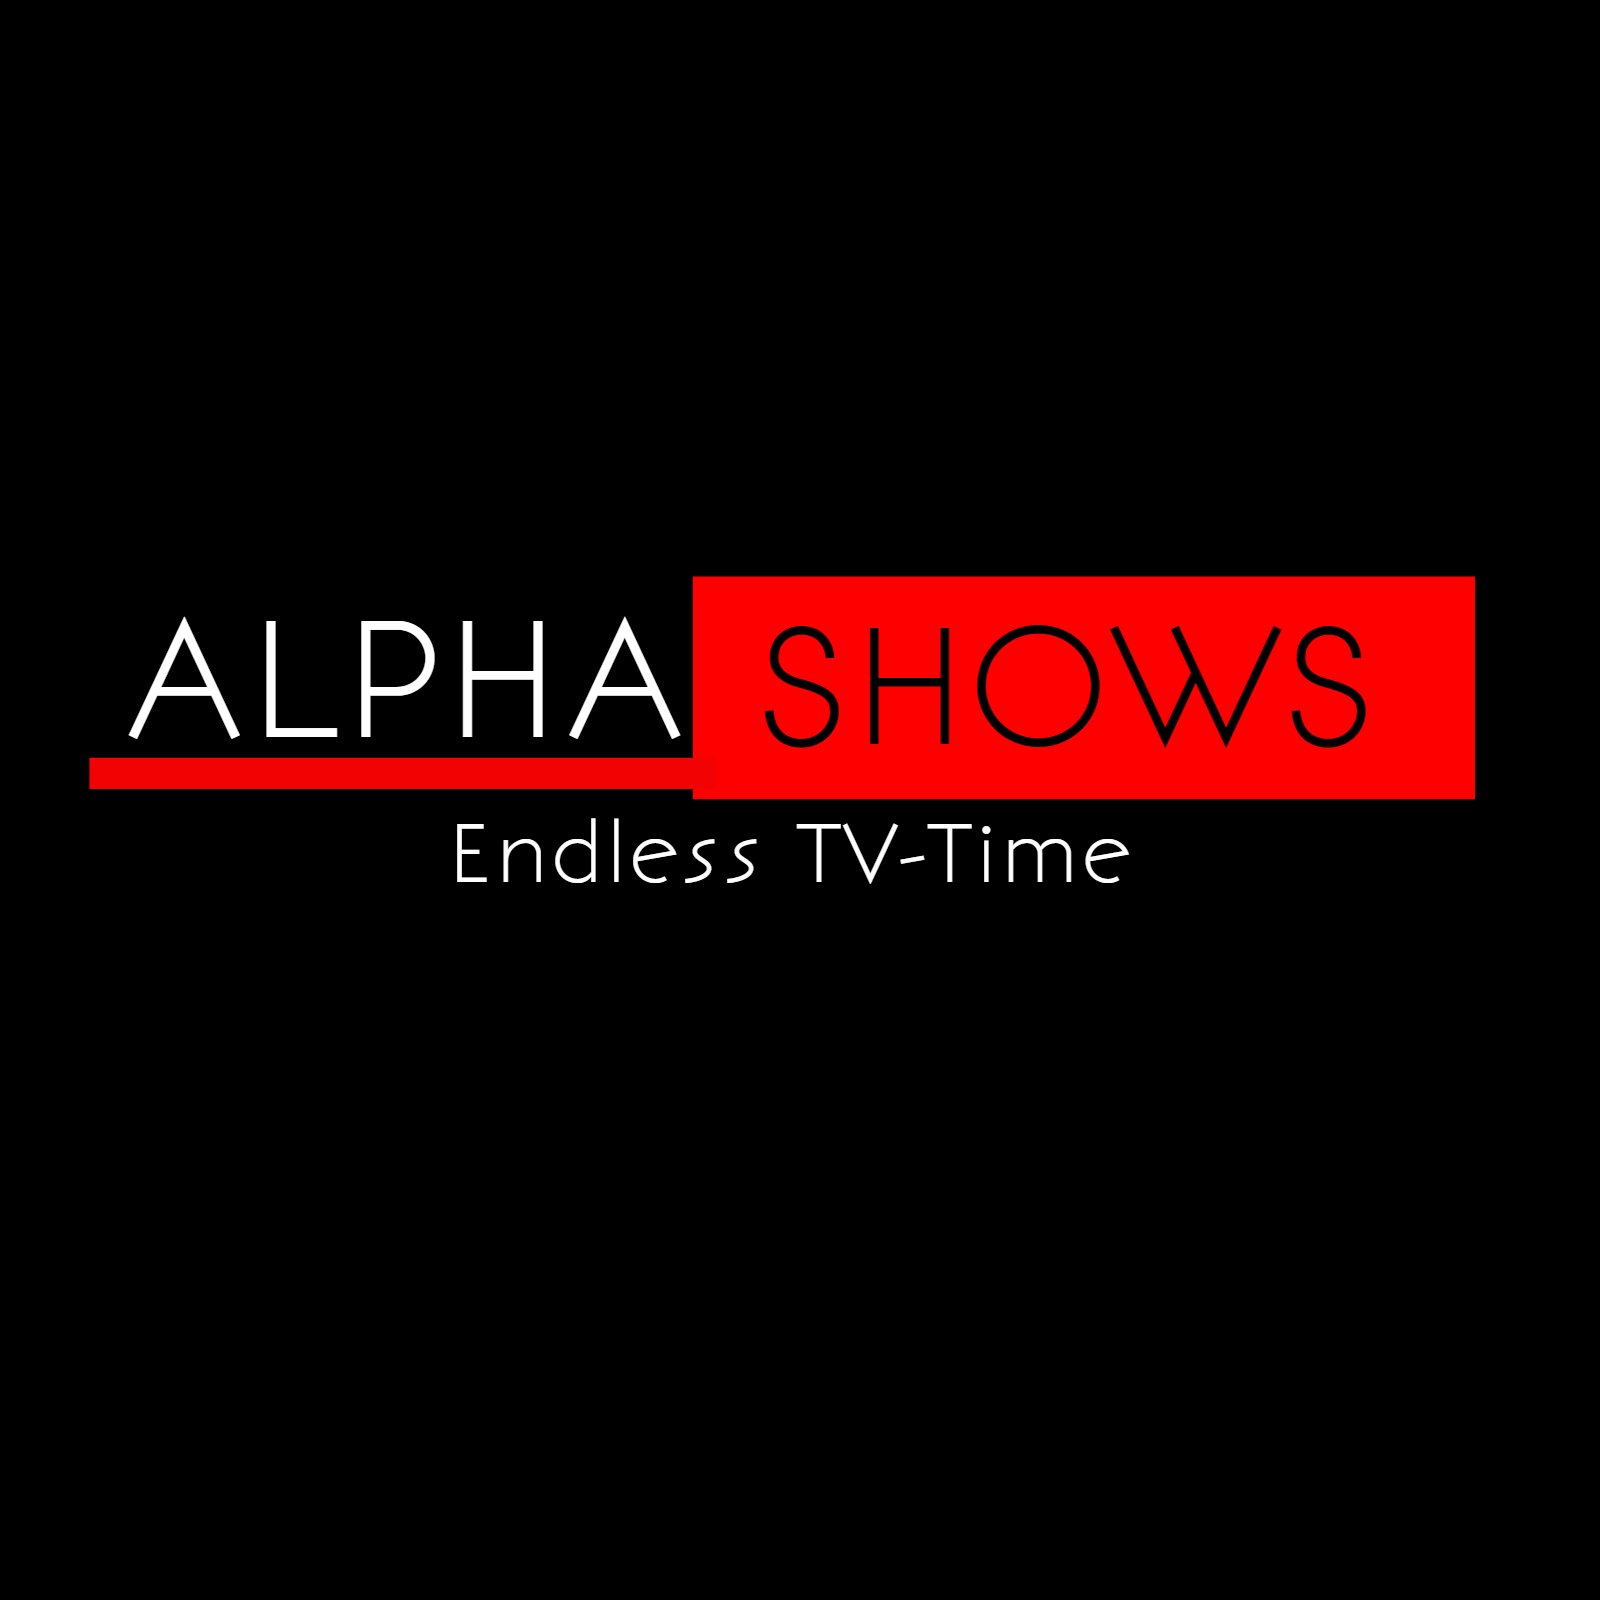 Alpha Shows, Endless TV-Time